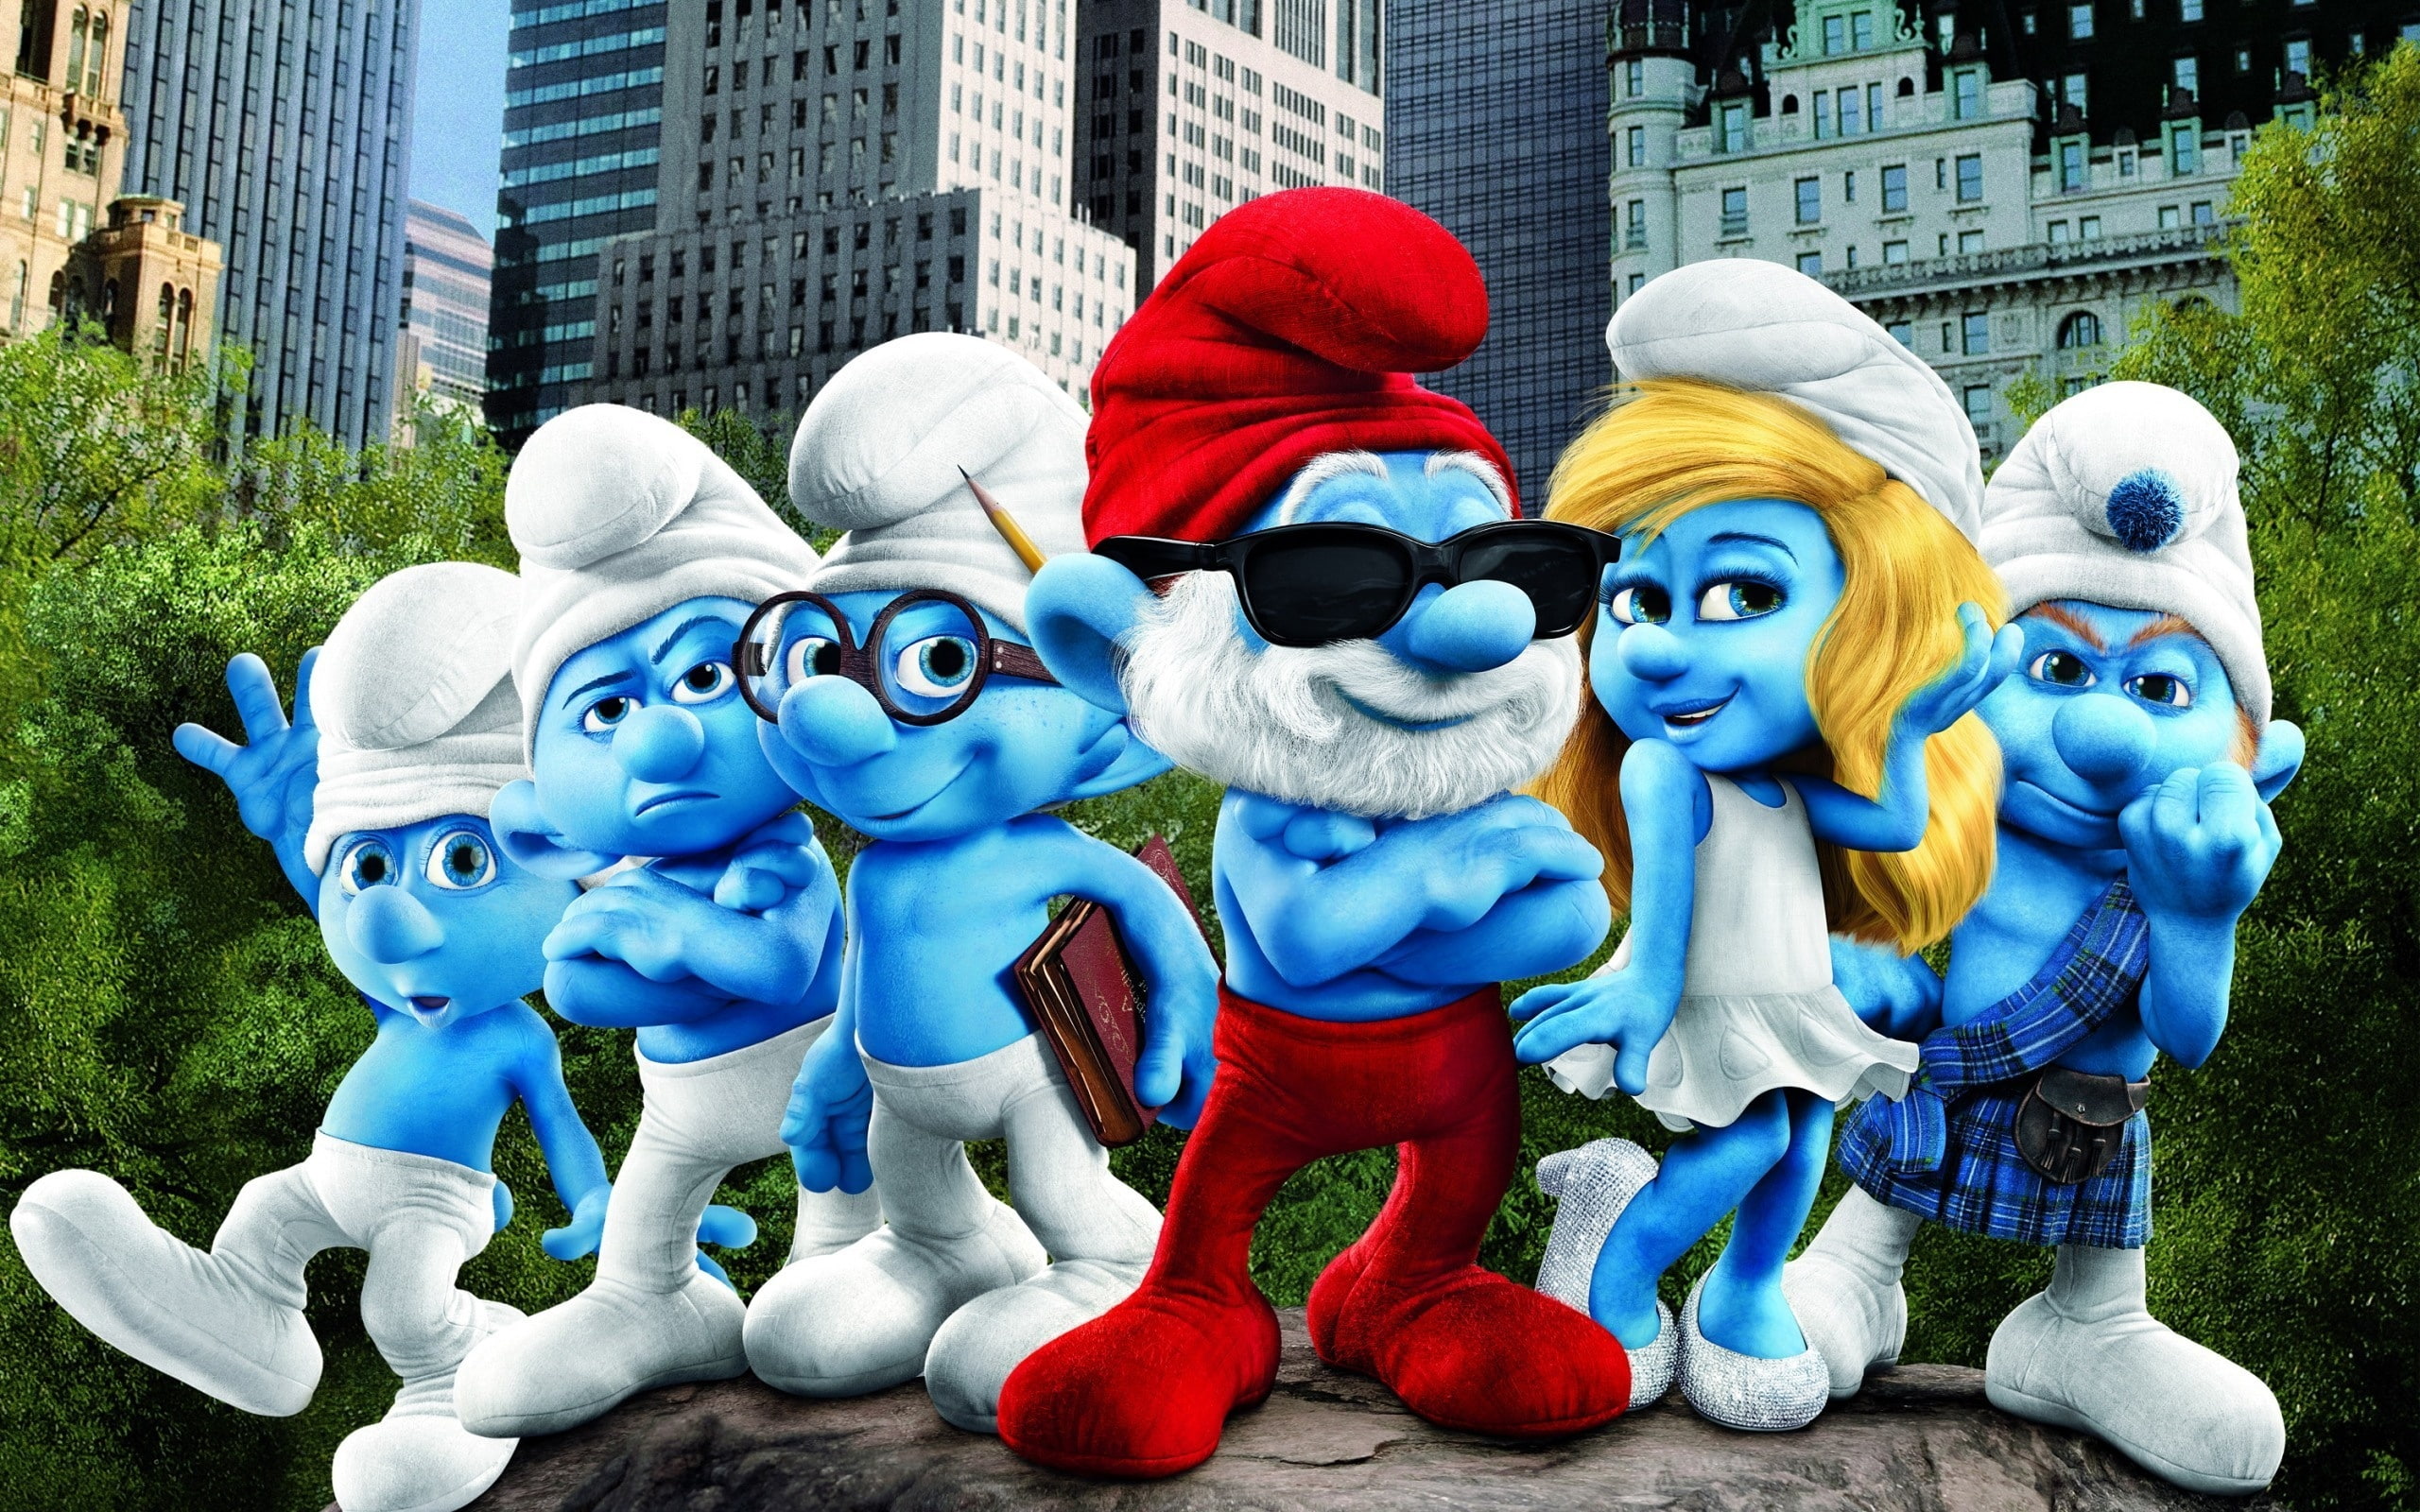 The Smurfs wide